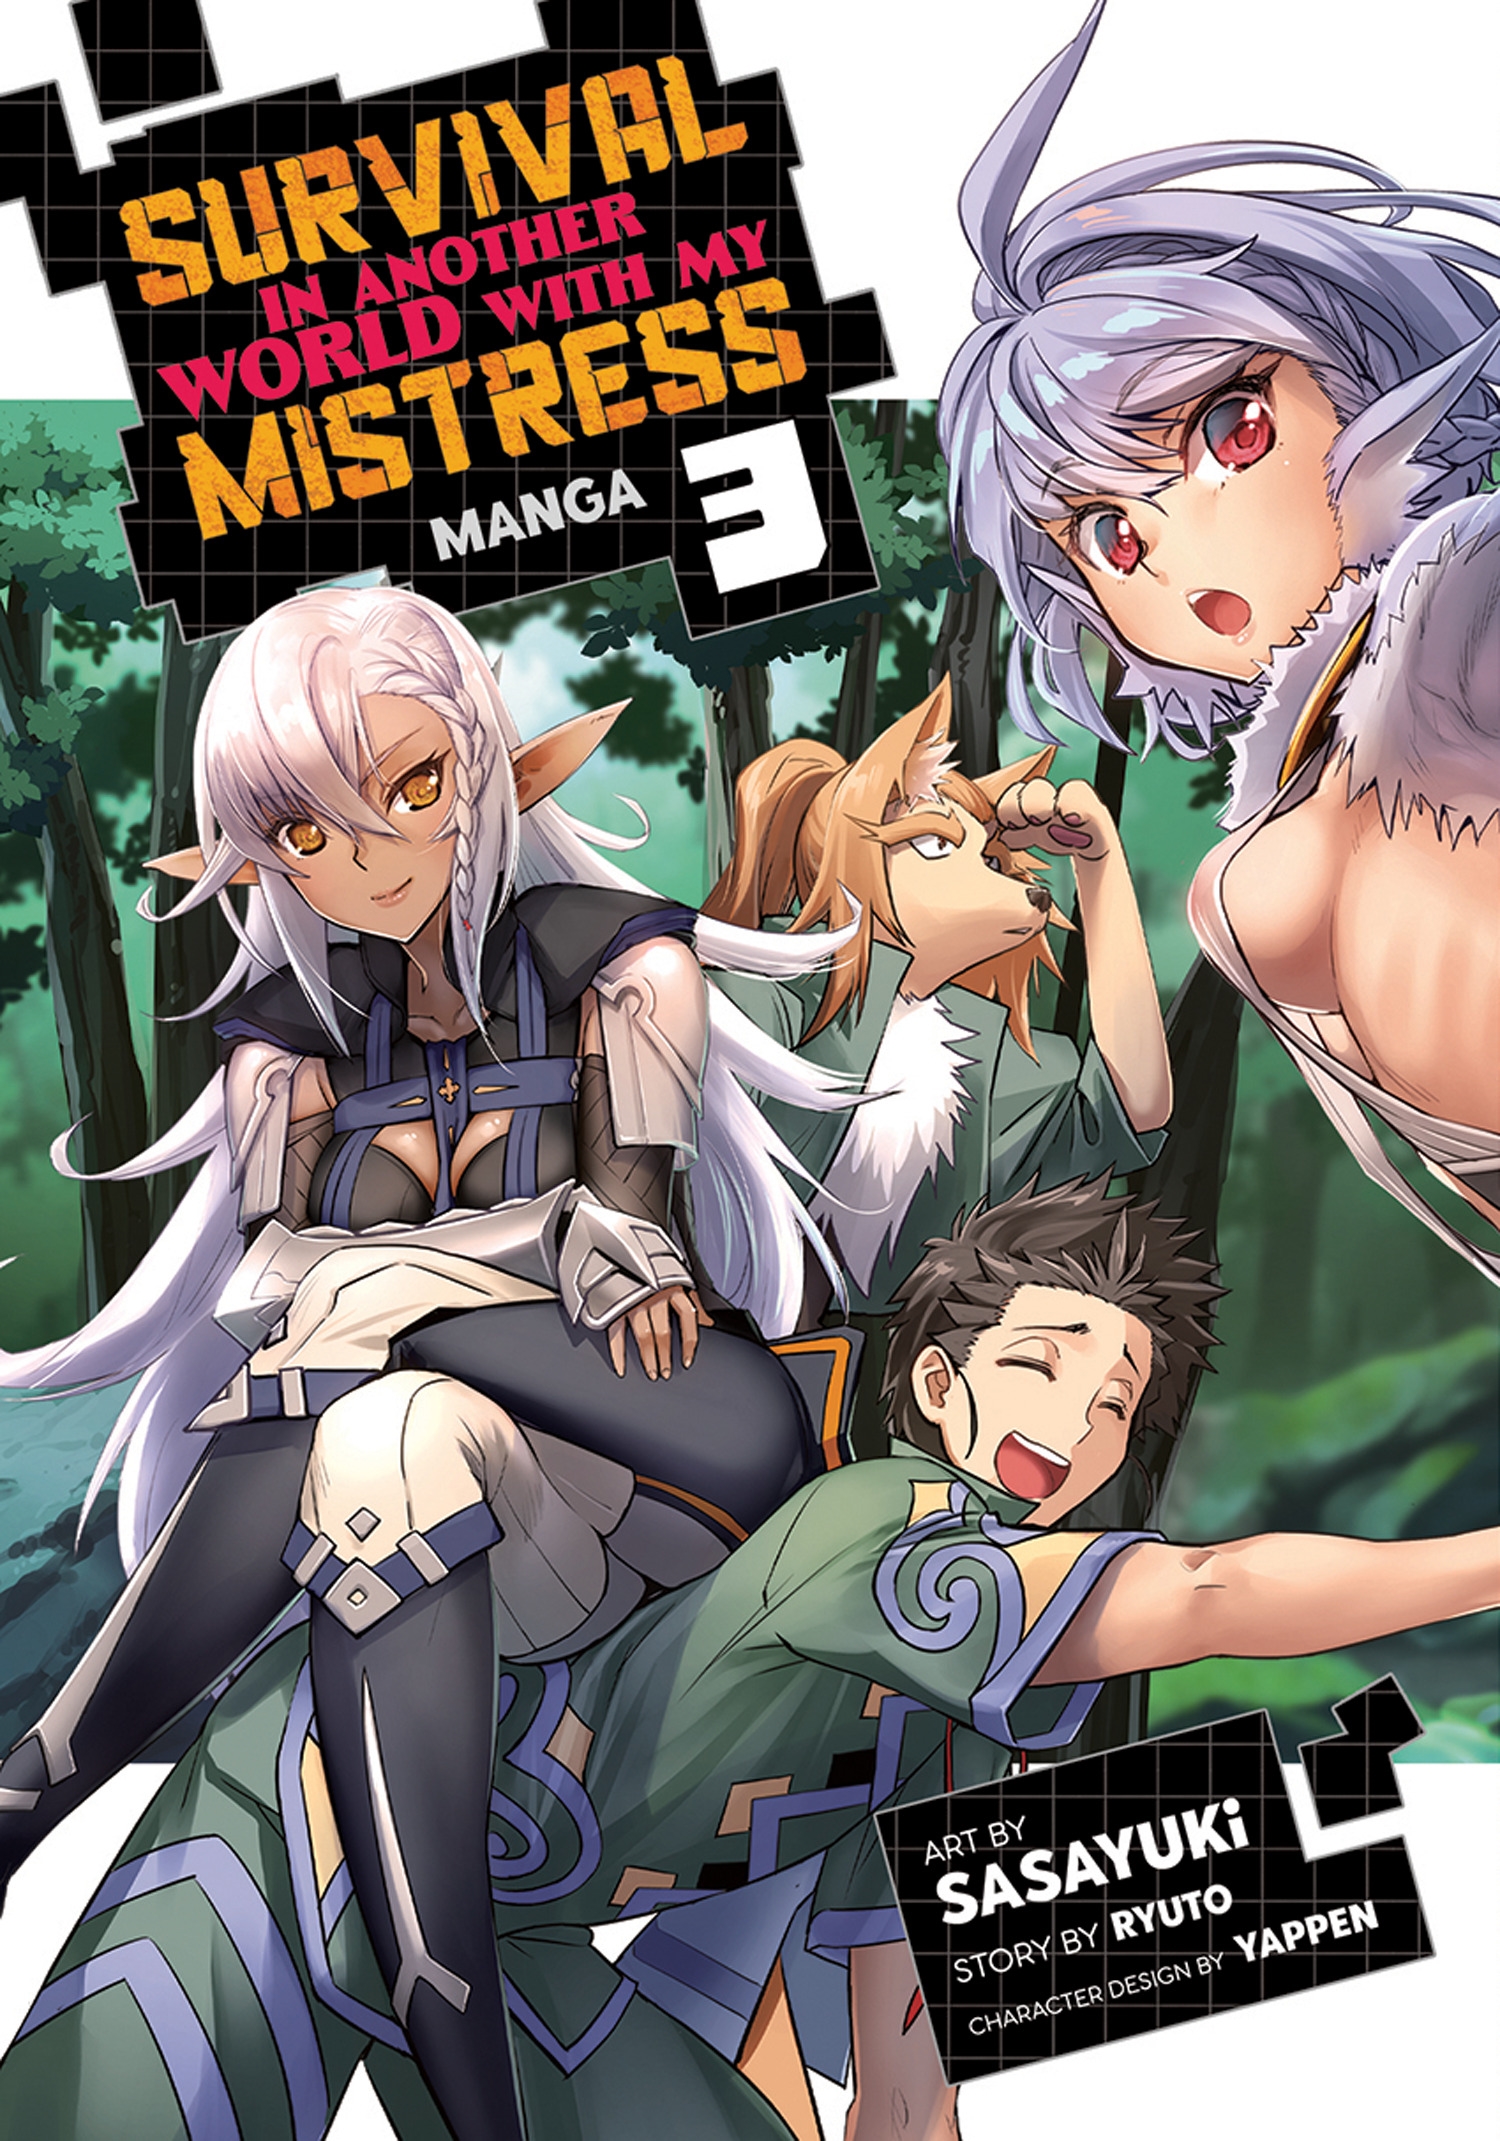 Survival in Another World with My Mistress! (Manga) Vol. 3 by Ryuto -  Penguin Books Australia